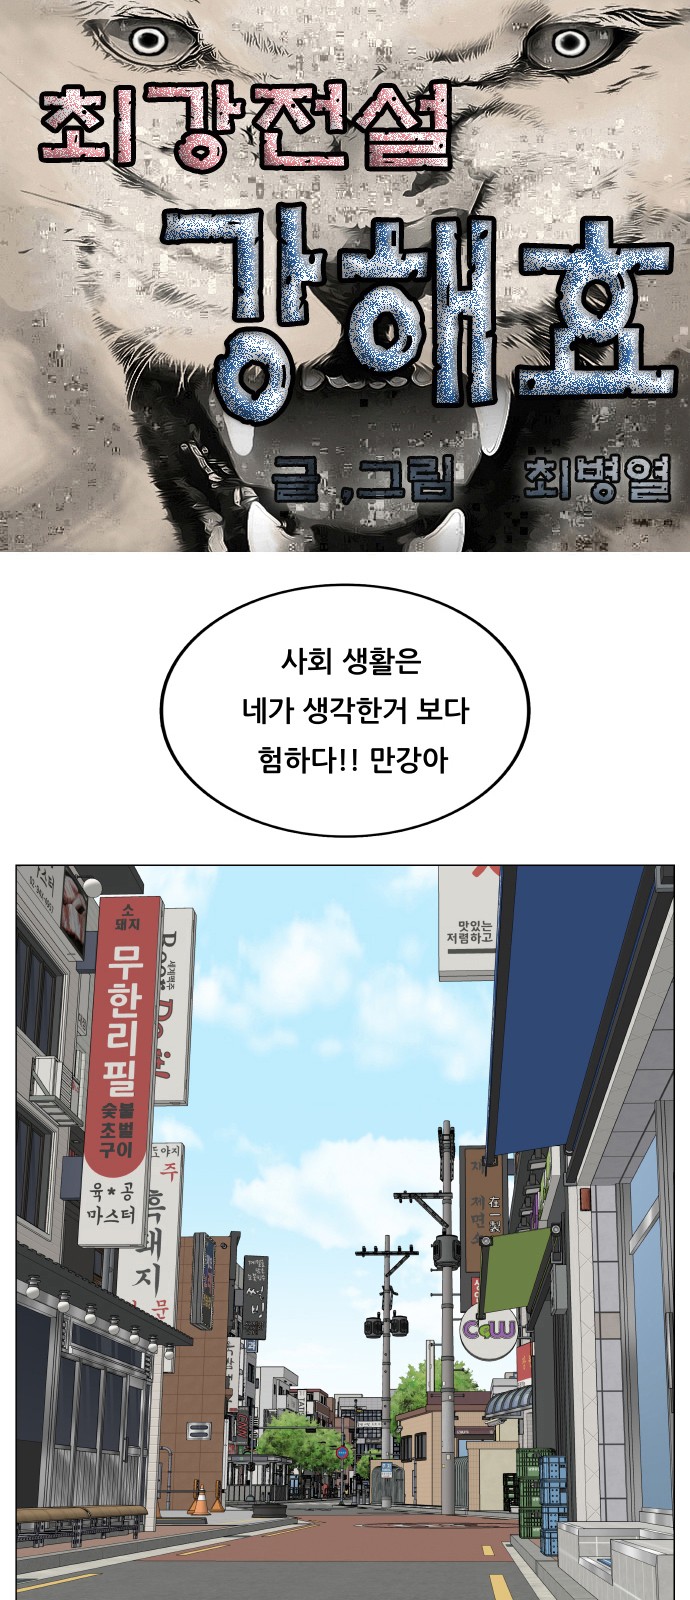 Ultimate Legend - Kang Hae Hyo - Chapter 360 - Page 1